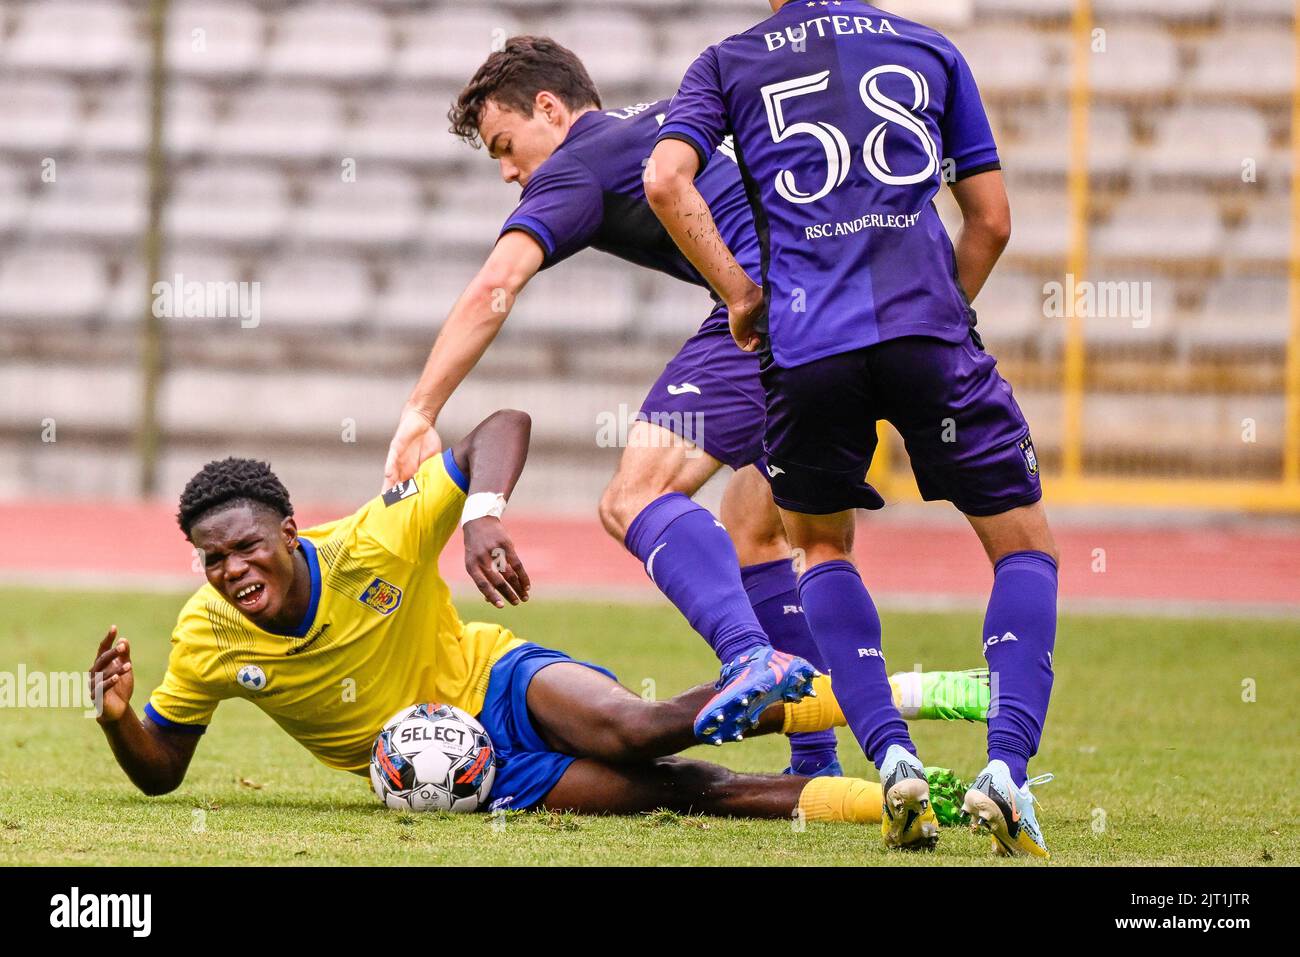 RSCA Futures' Mohamed Bouchouari and Beveren's Kevin Hoggas fight for the  ball during a soccer match, Stock Photo, Picture And Rights Managed  Image. Pic. VPM-41254264